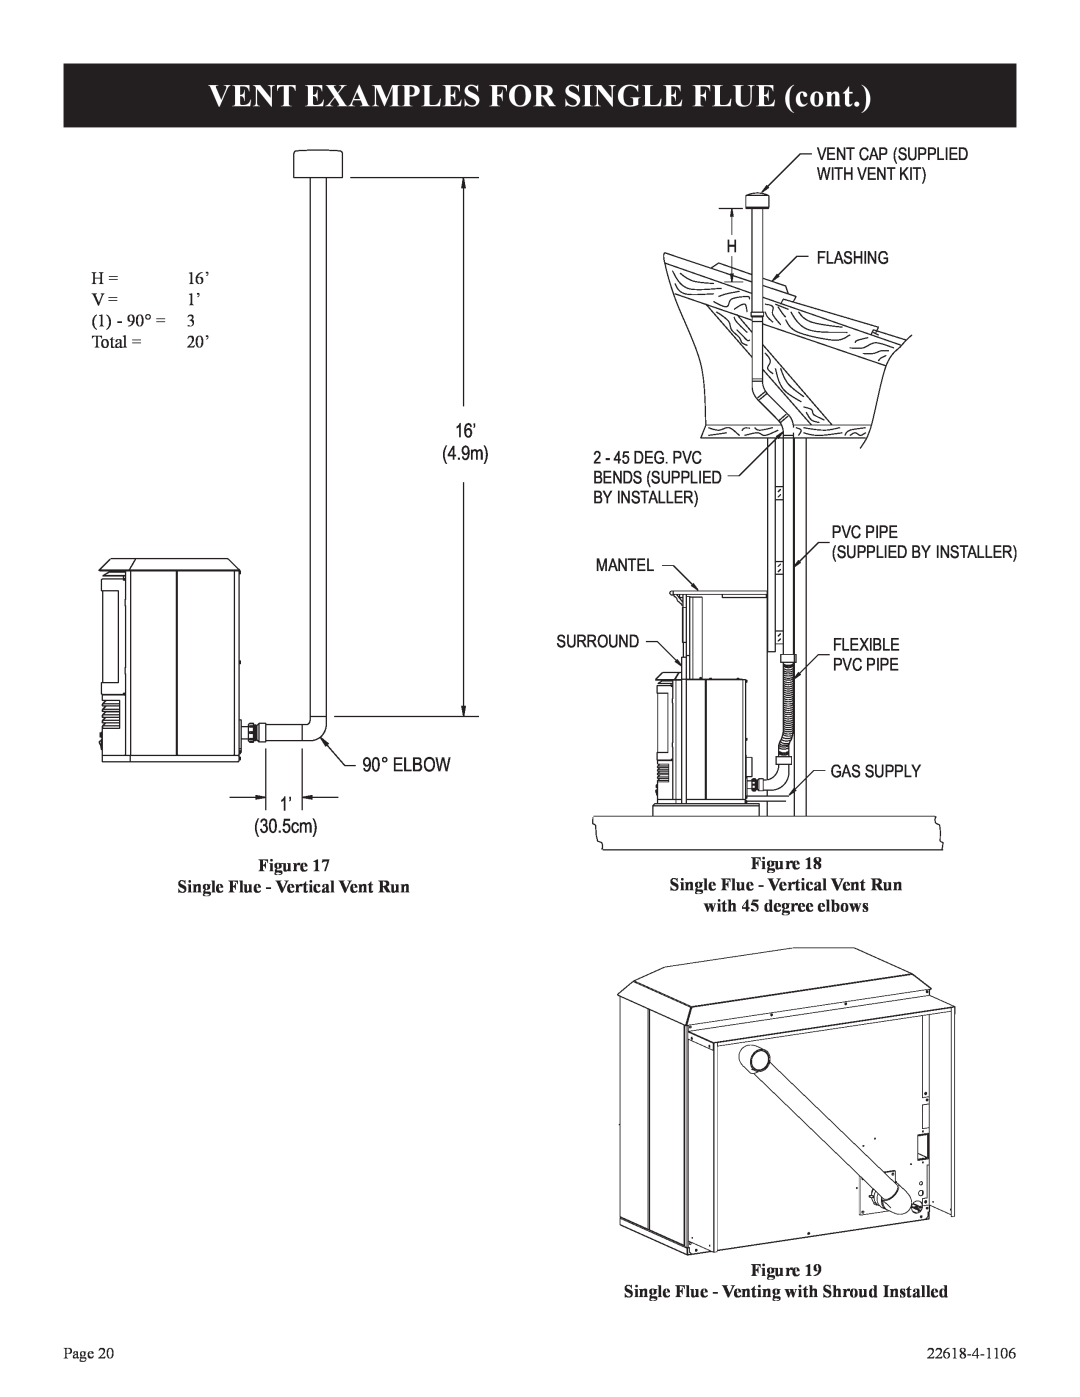 GN National Electric GN, BP)-1 VENT EXAMPLES FOR SINGLE FLUE cont, 16’ 4.9m, ELBOW 1’ 30.5cm, with 45 degree elbows, Page 